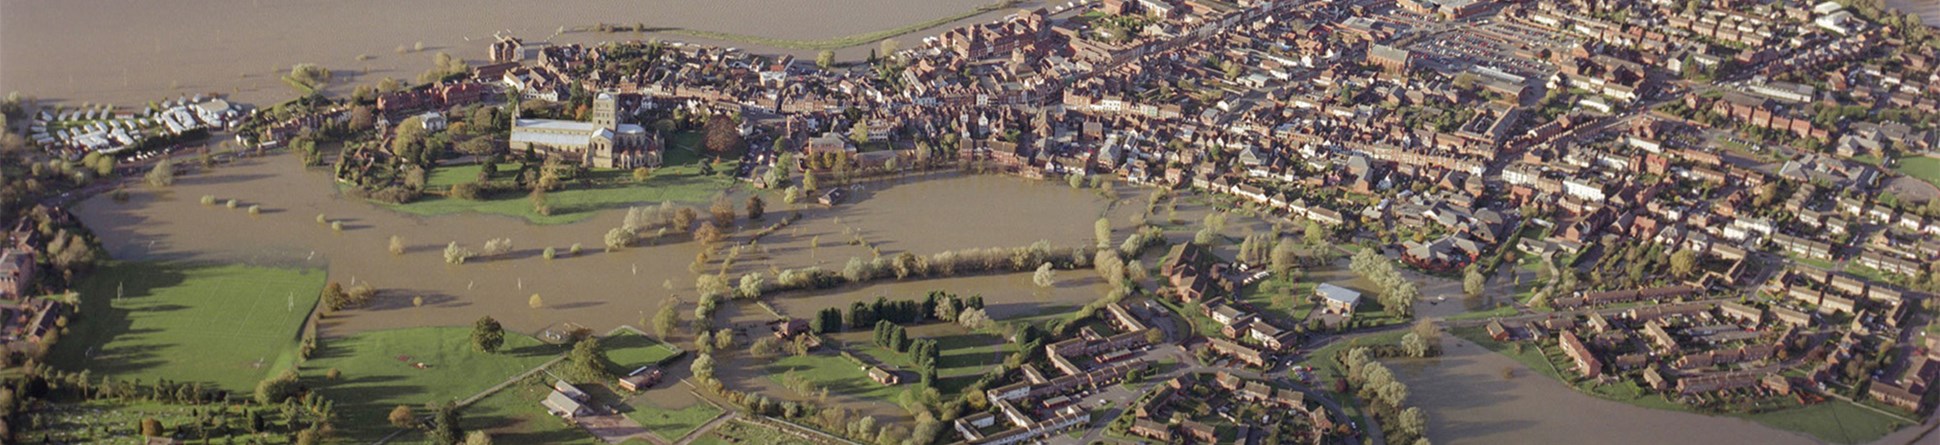 Flooding in and around Tewkesbury in 2007